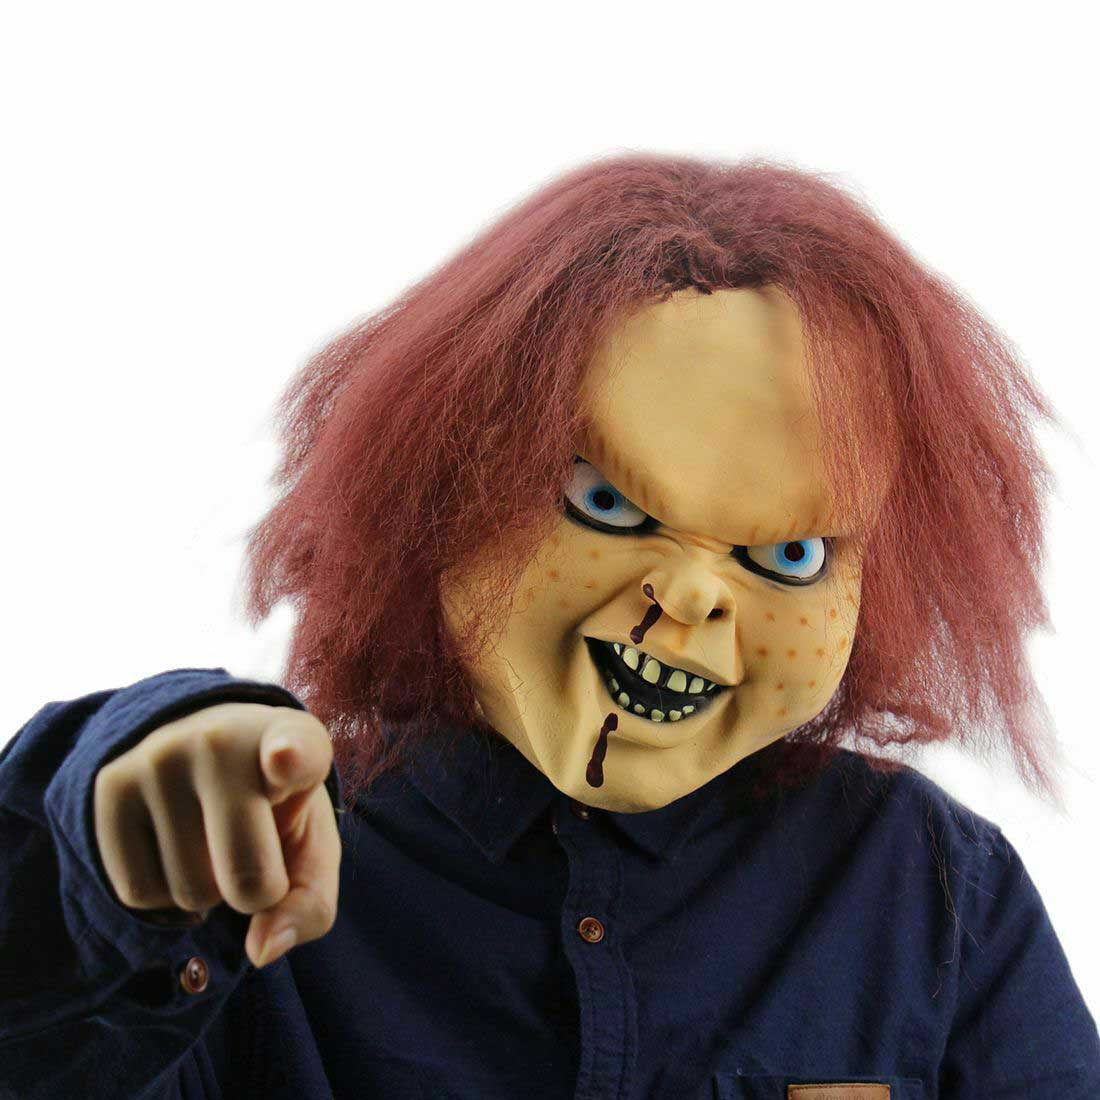 Adult Child's Play 2 Evil Chucky Latex Costume Full Mask Horror Scary Halloween 